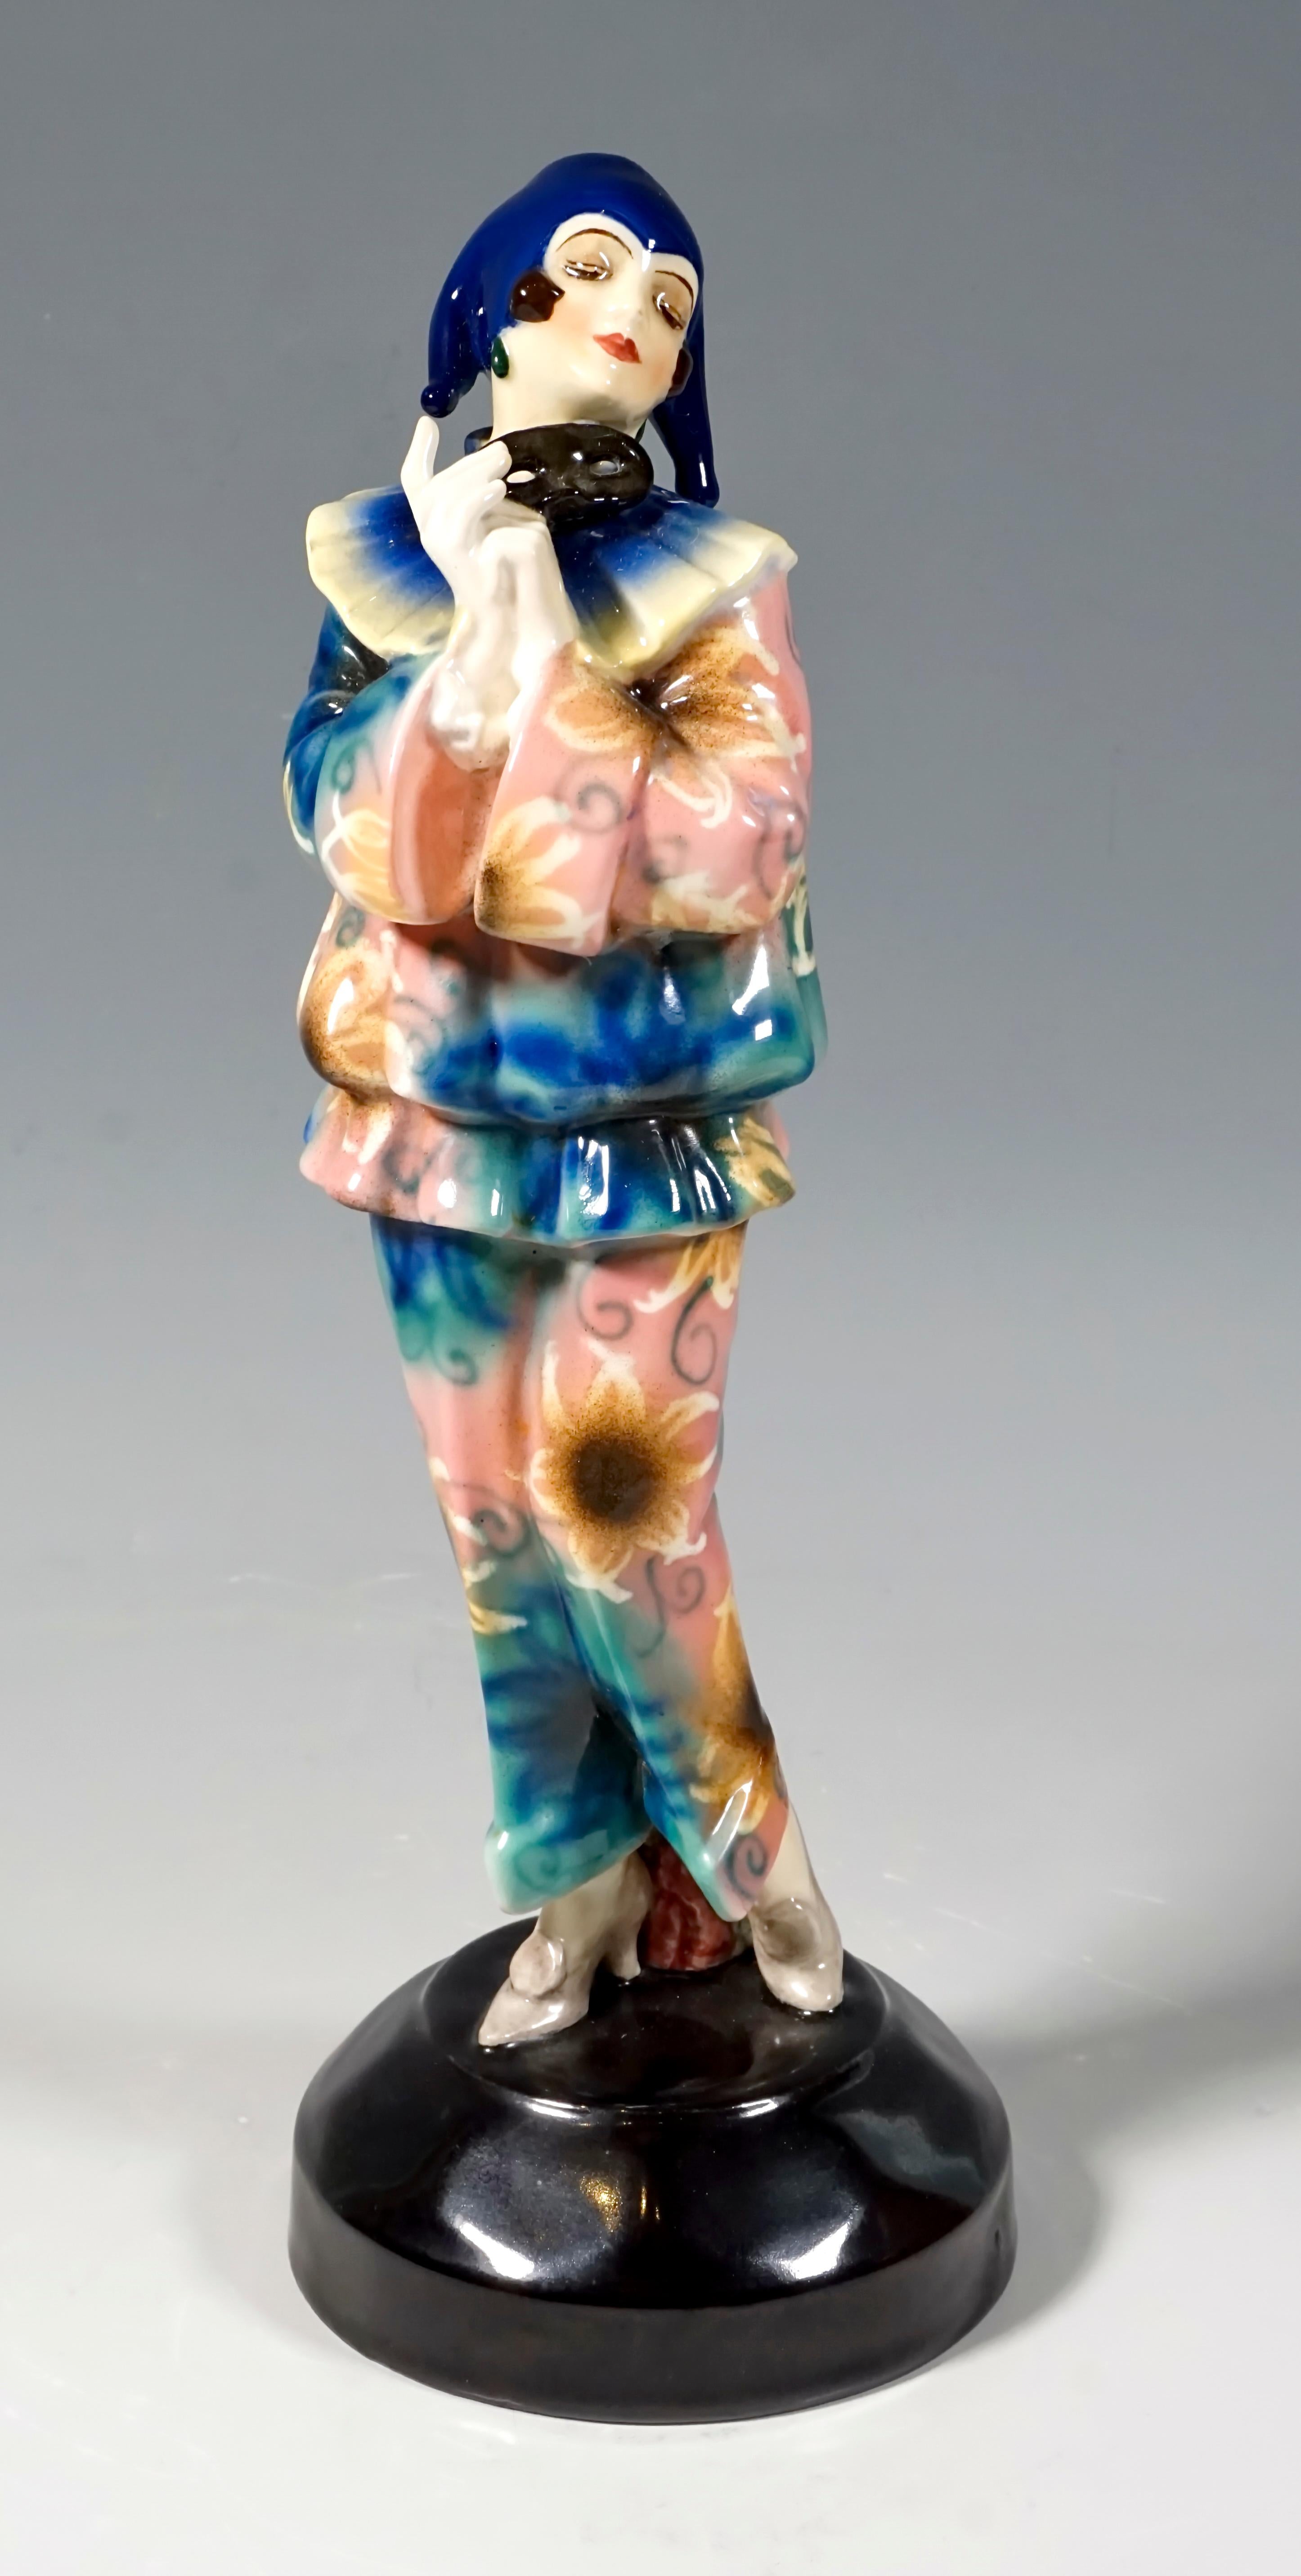 Finest Viennese ceramic art from the 1920s:
The standing young lady holds a black mask in front of her in her folded hands and looks dreamily to the side. She wears a blue and rose two-piece suit with a slouchy top and ruff and a three-pronged cap.